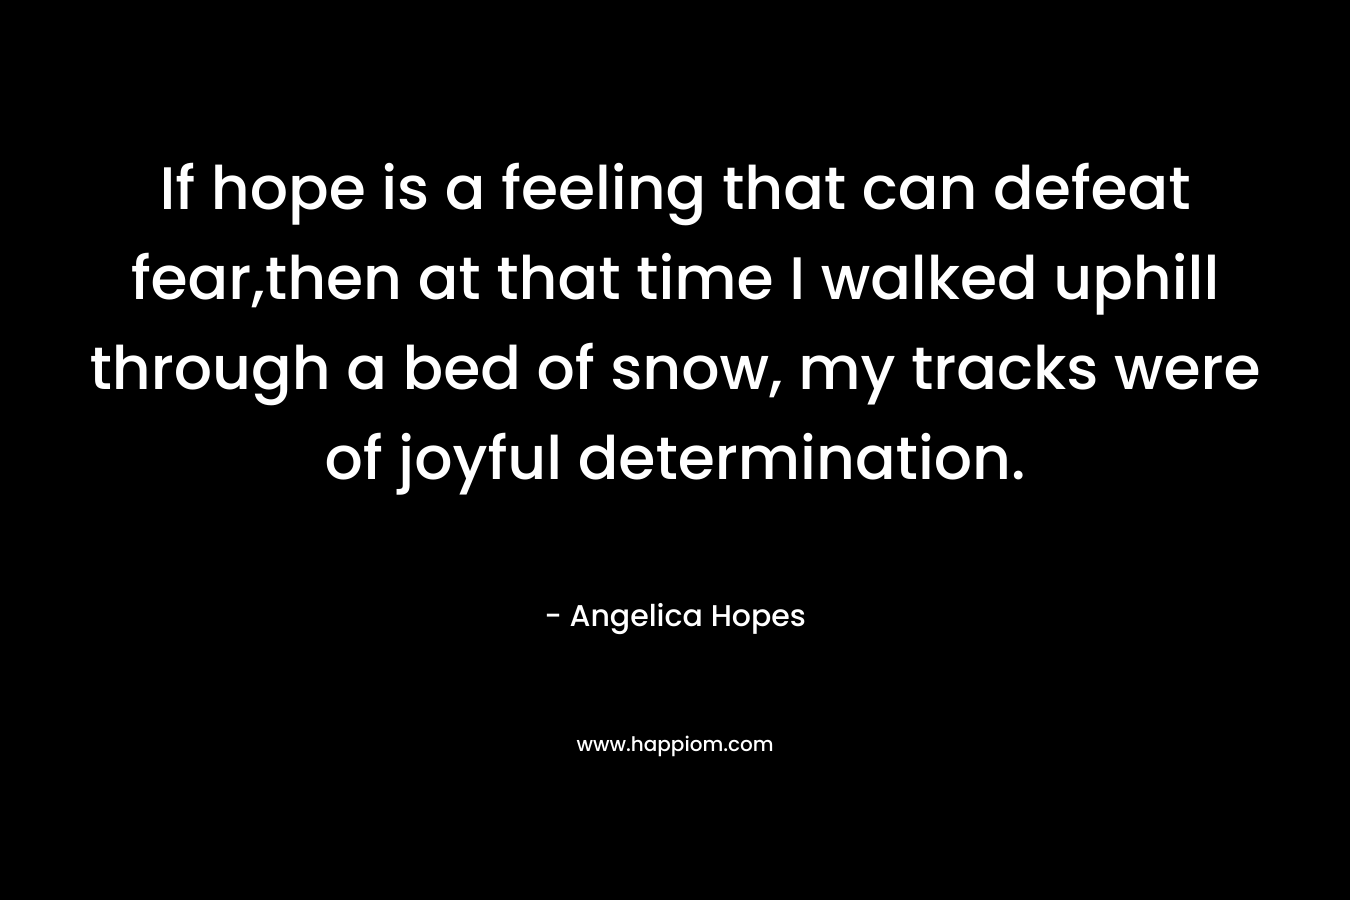 If hope is a feeling that can defeat fear,then at that time I walked uphill through a bed of snow, my tracks were of joyful determination. – Angelica Hopes